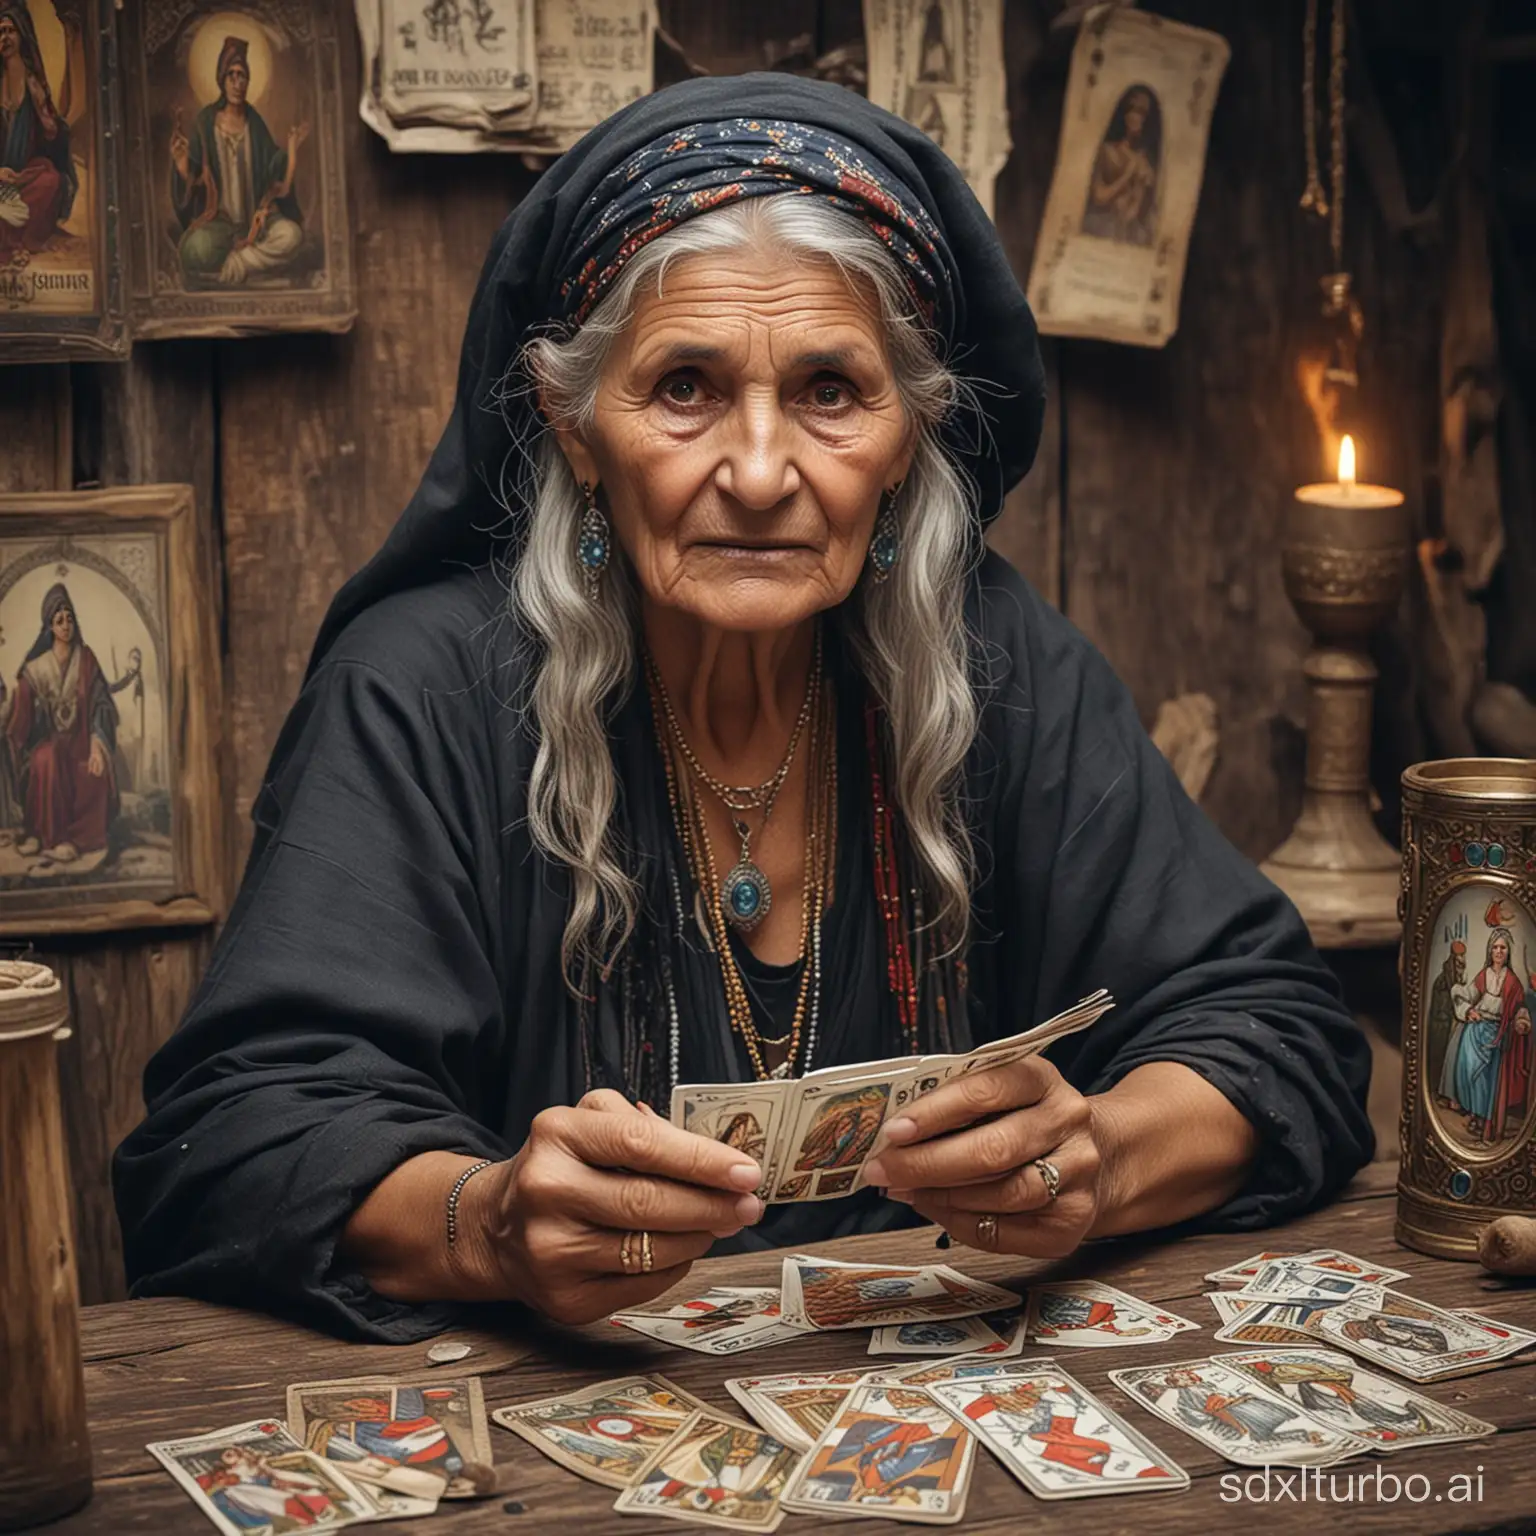 Mystical-Gypsy-Fortune-Teller-with-Tarot-Cards-in-an-Enchanting-Cottage